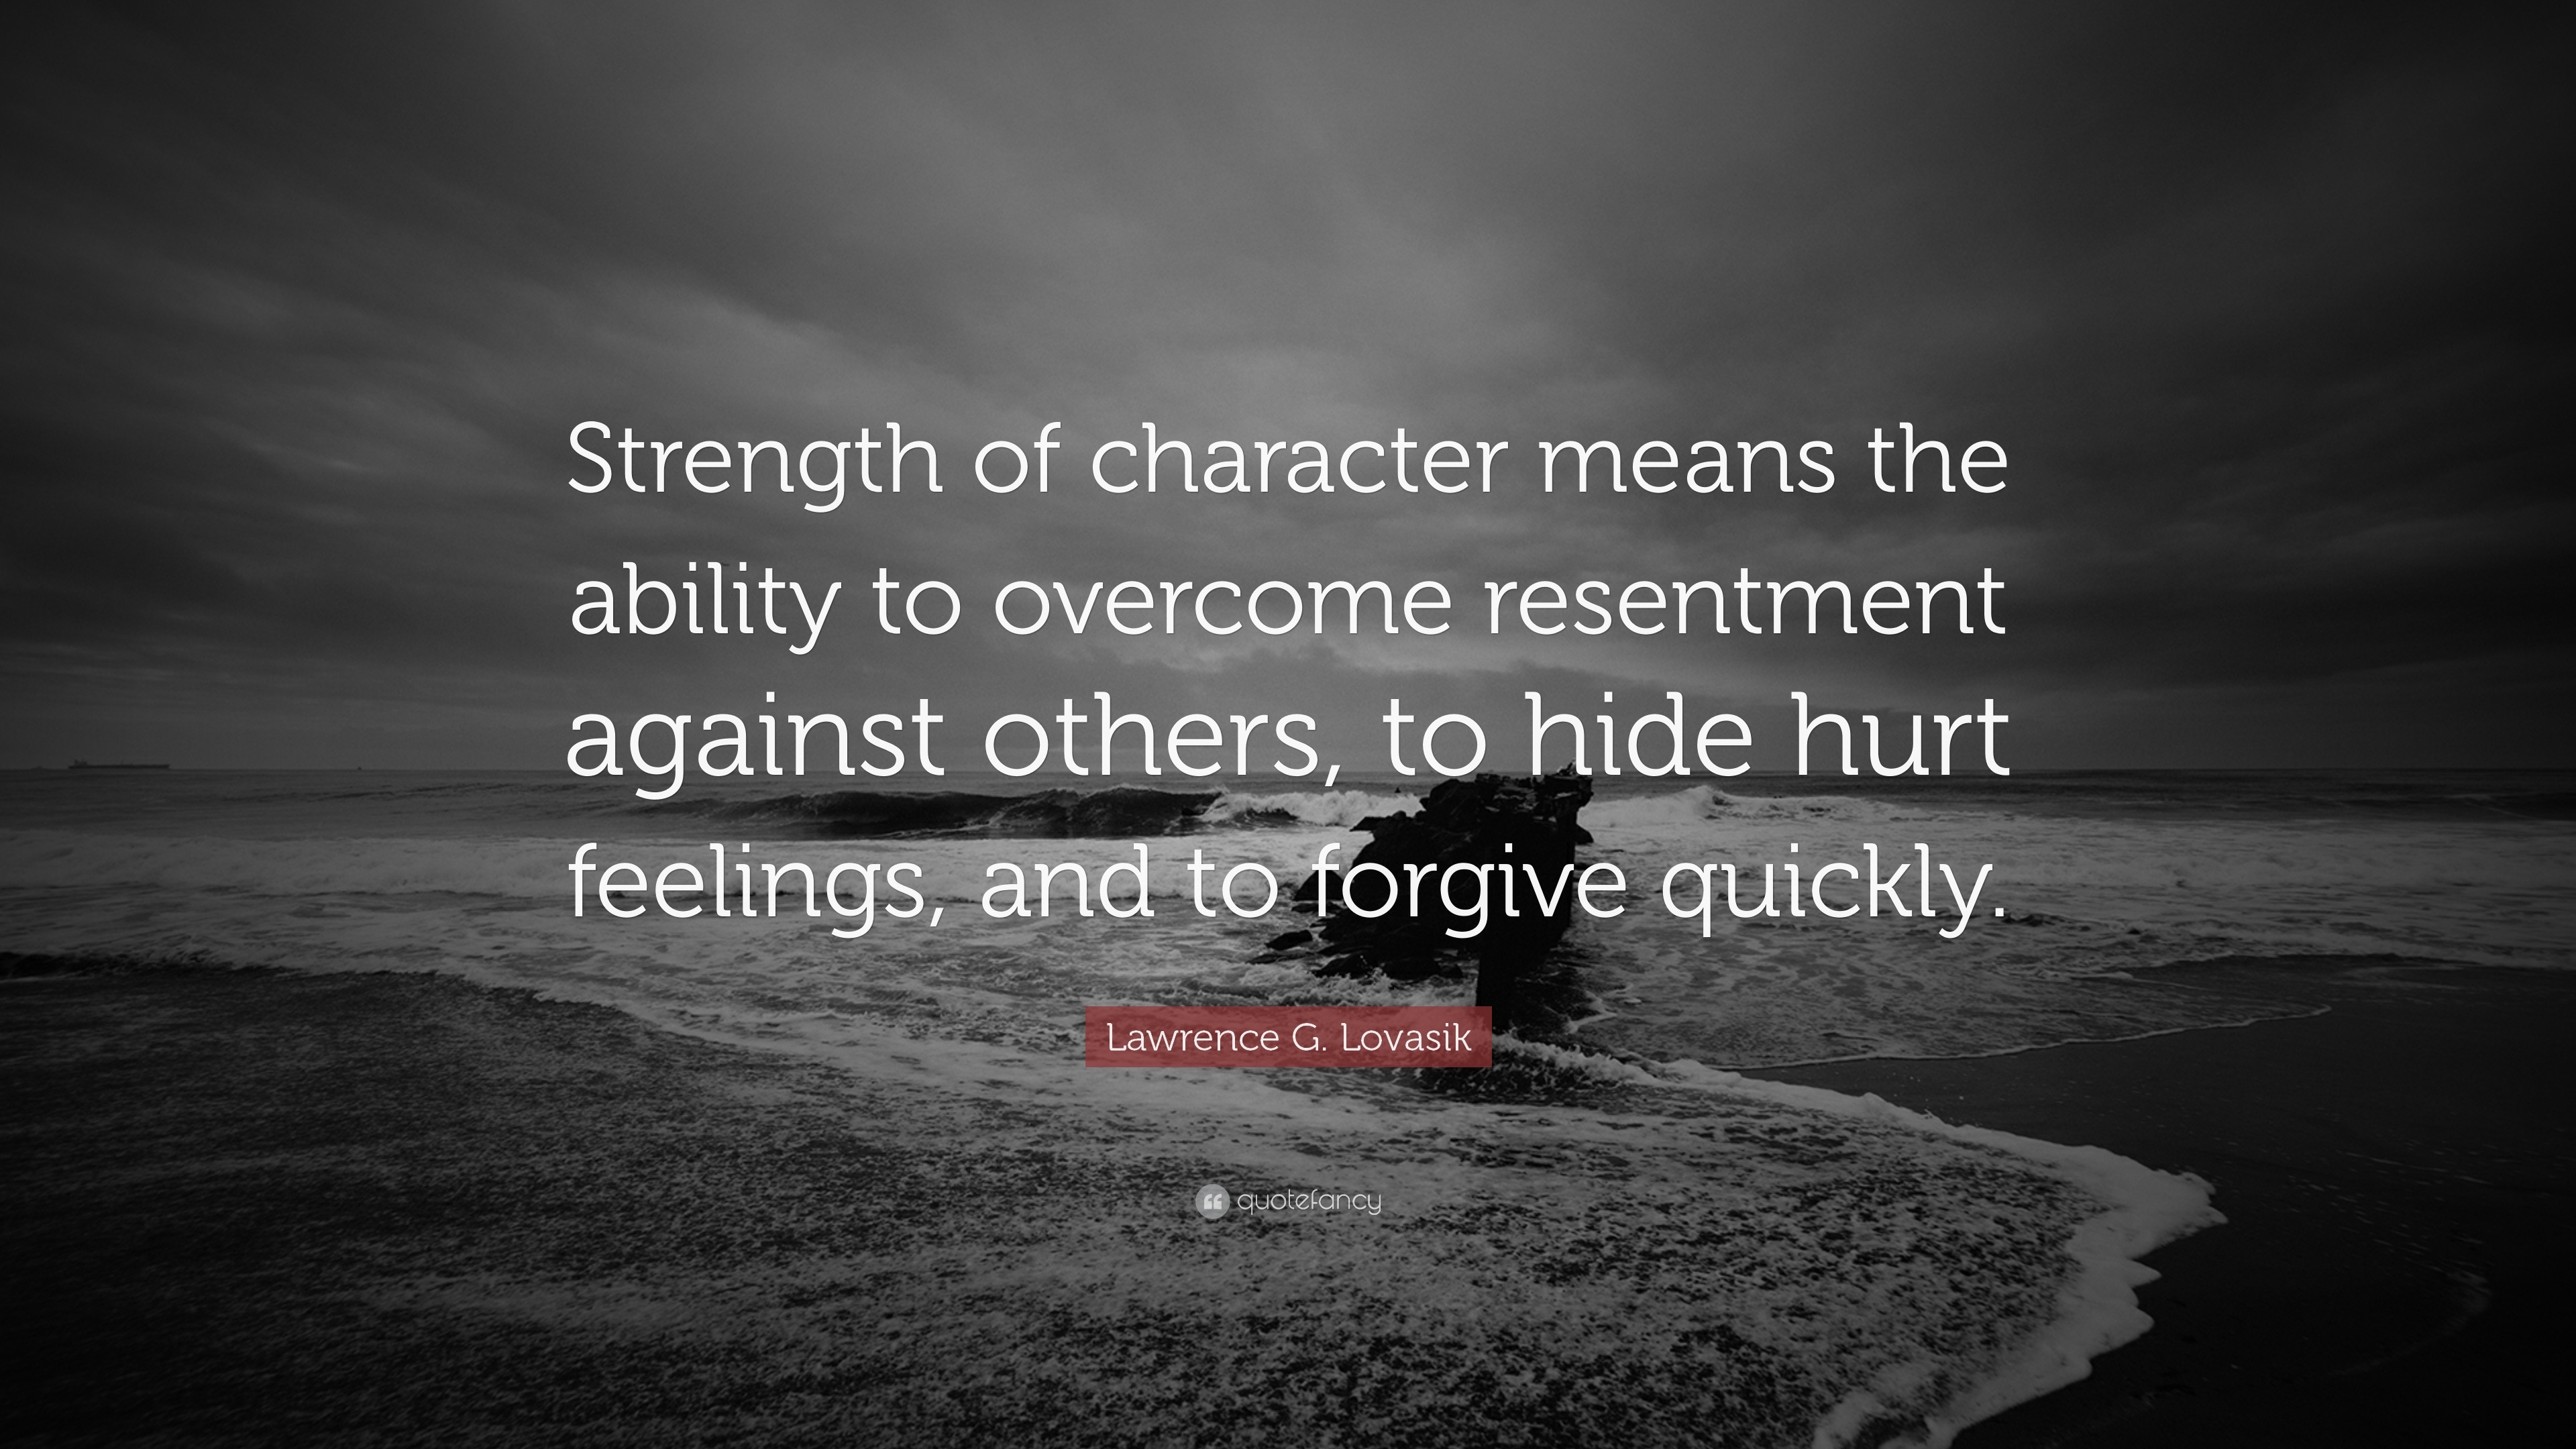 Lawrence G. Lovasik Quote: “Strength of character means the ability to ...